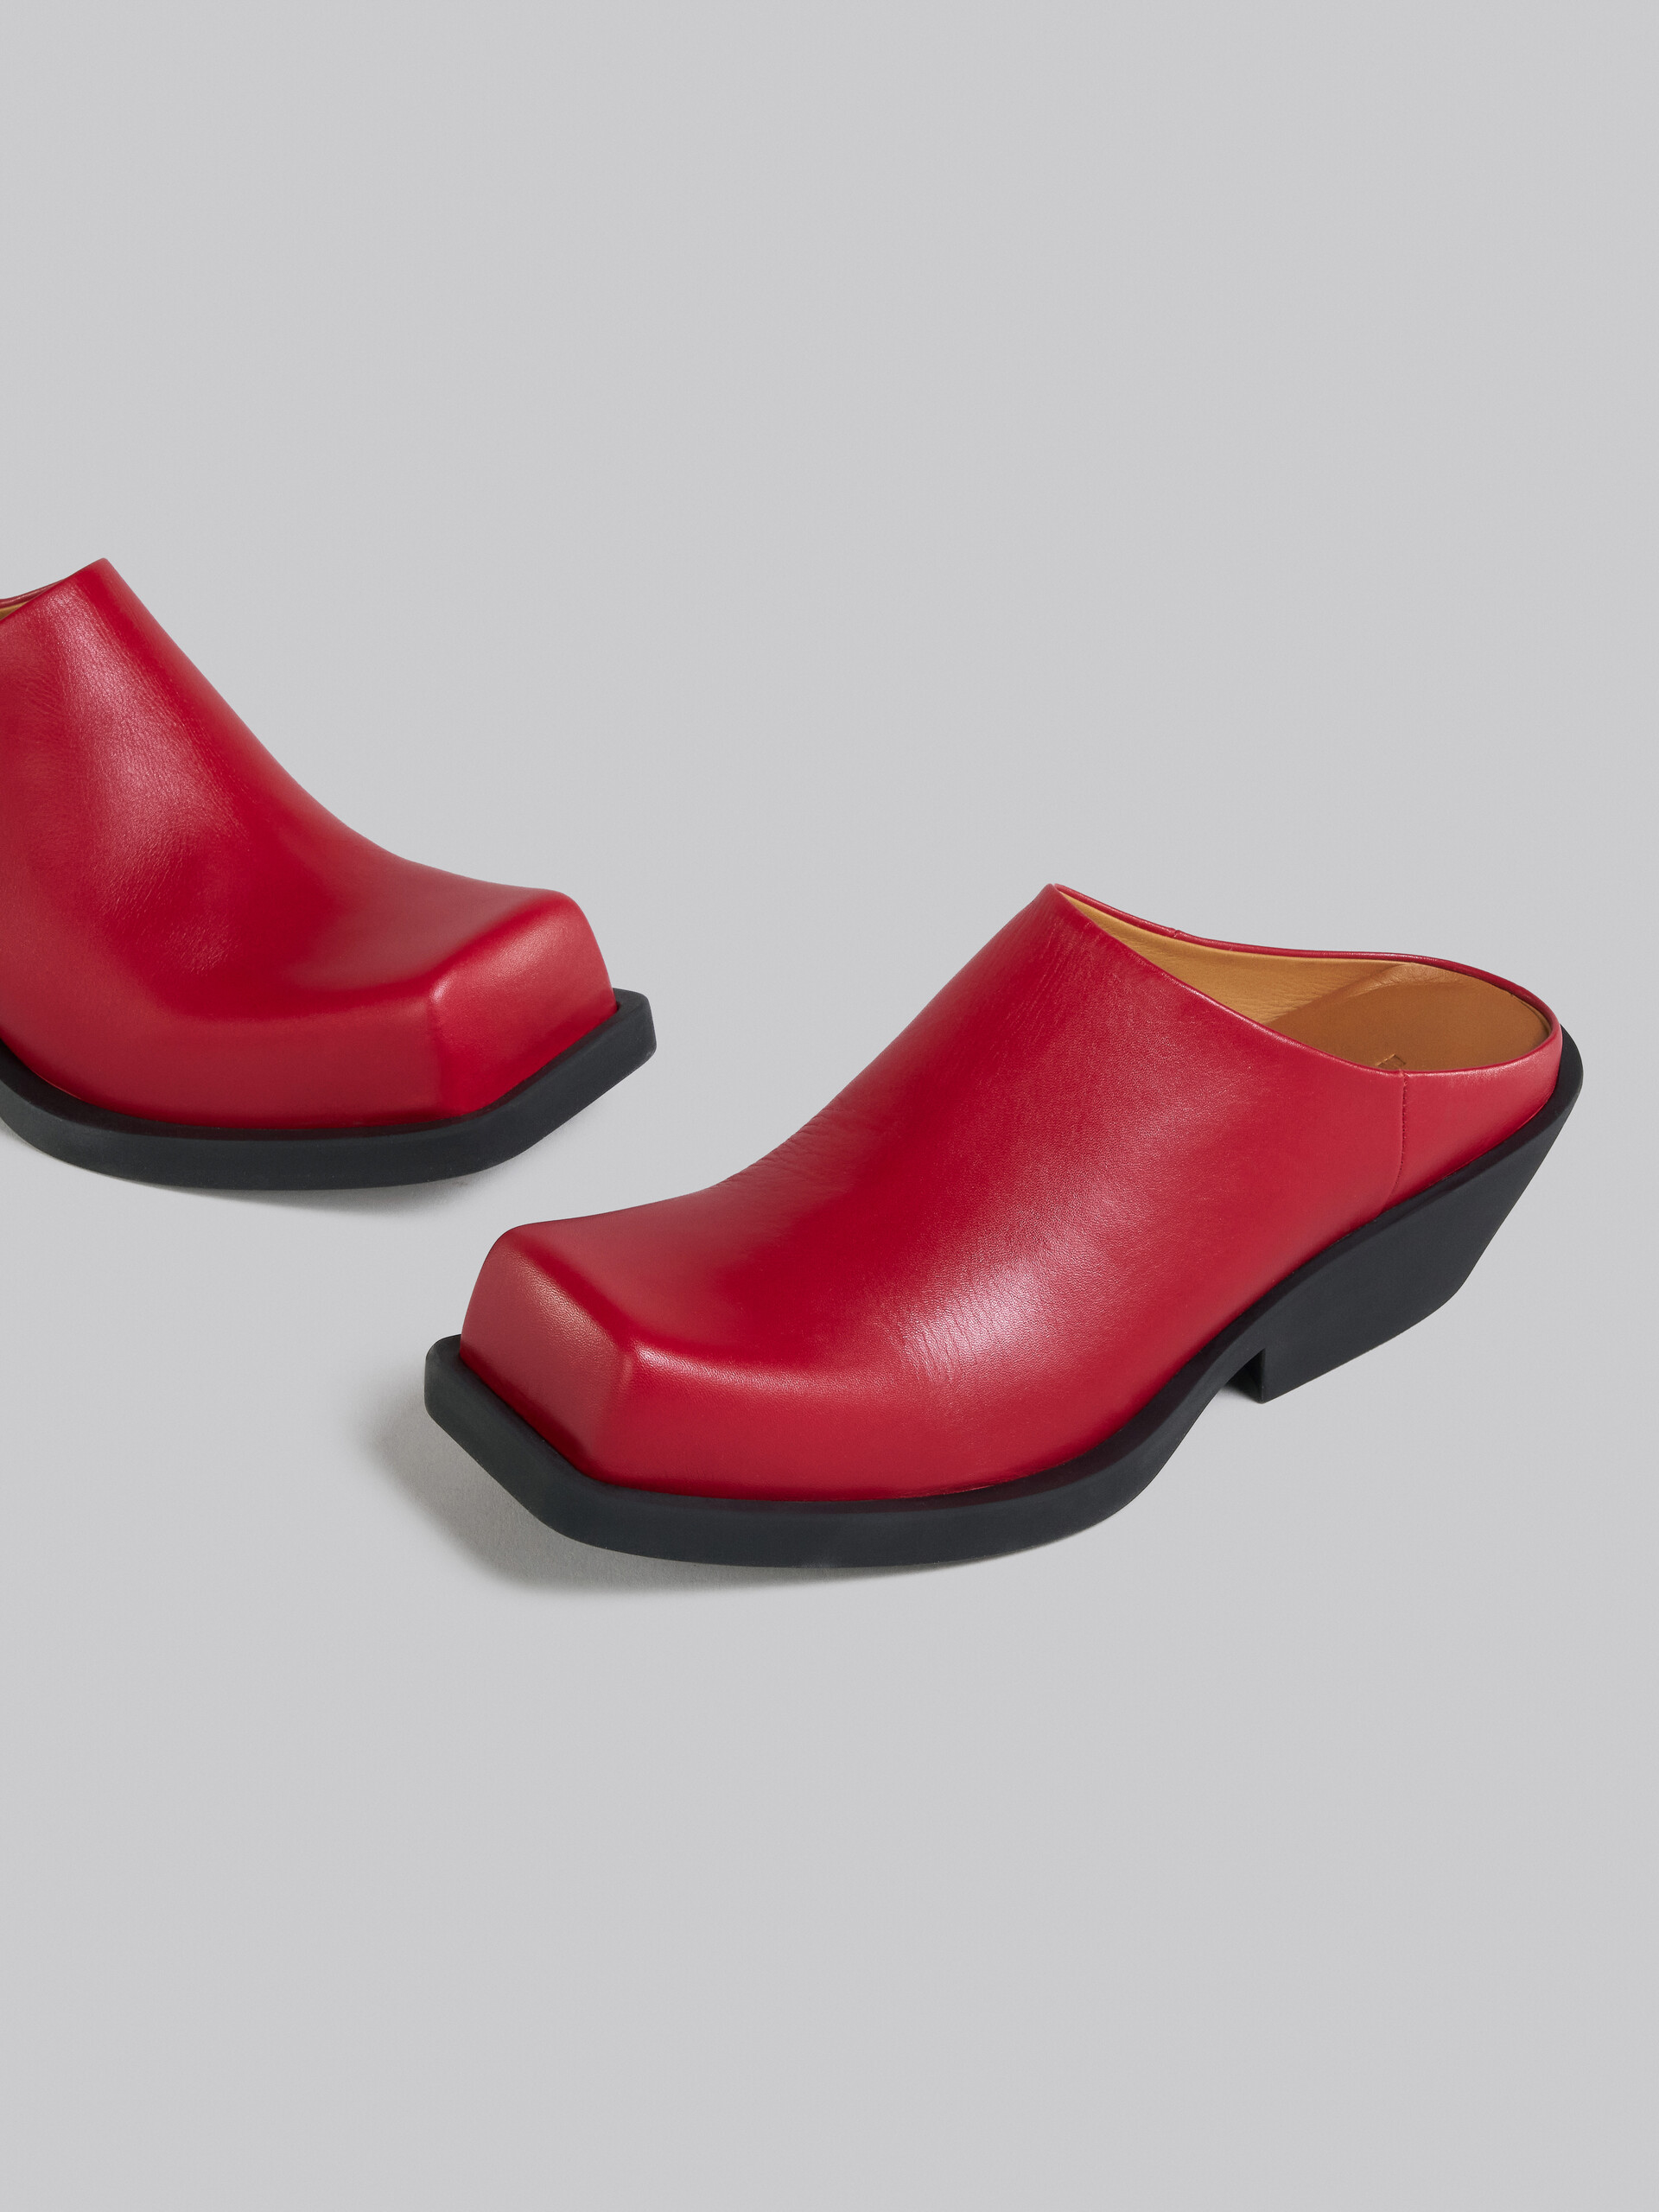 Red leather sabot - Clogs - Image 5